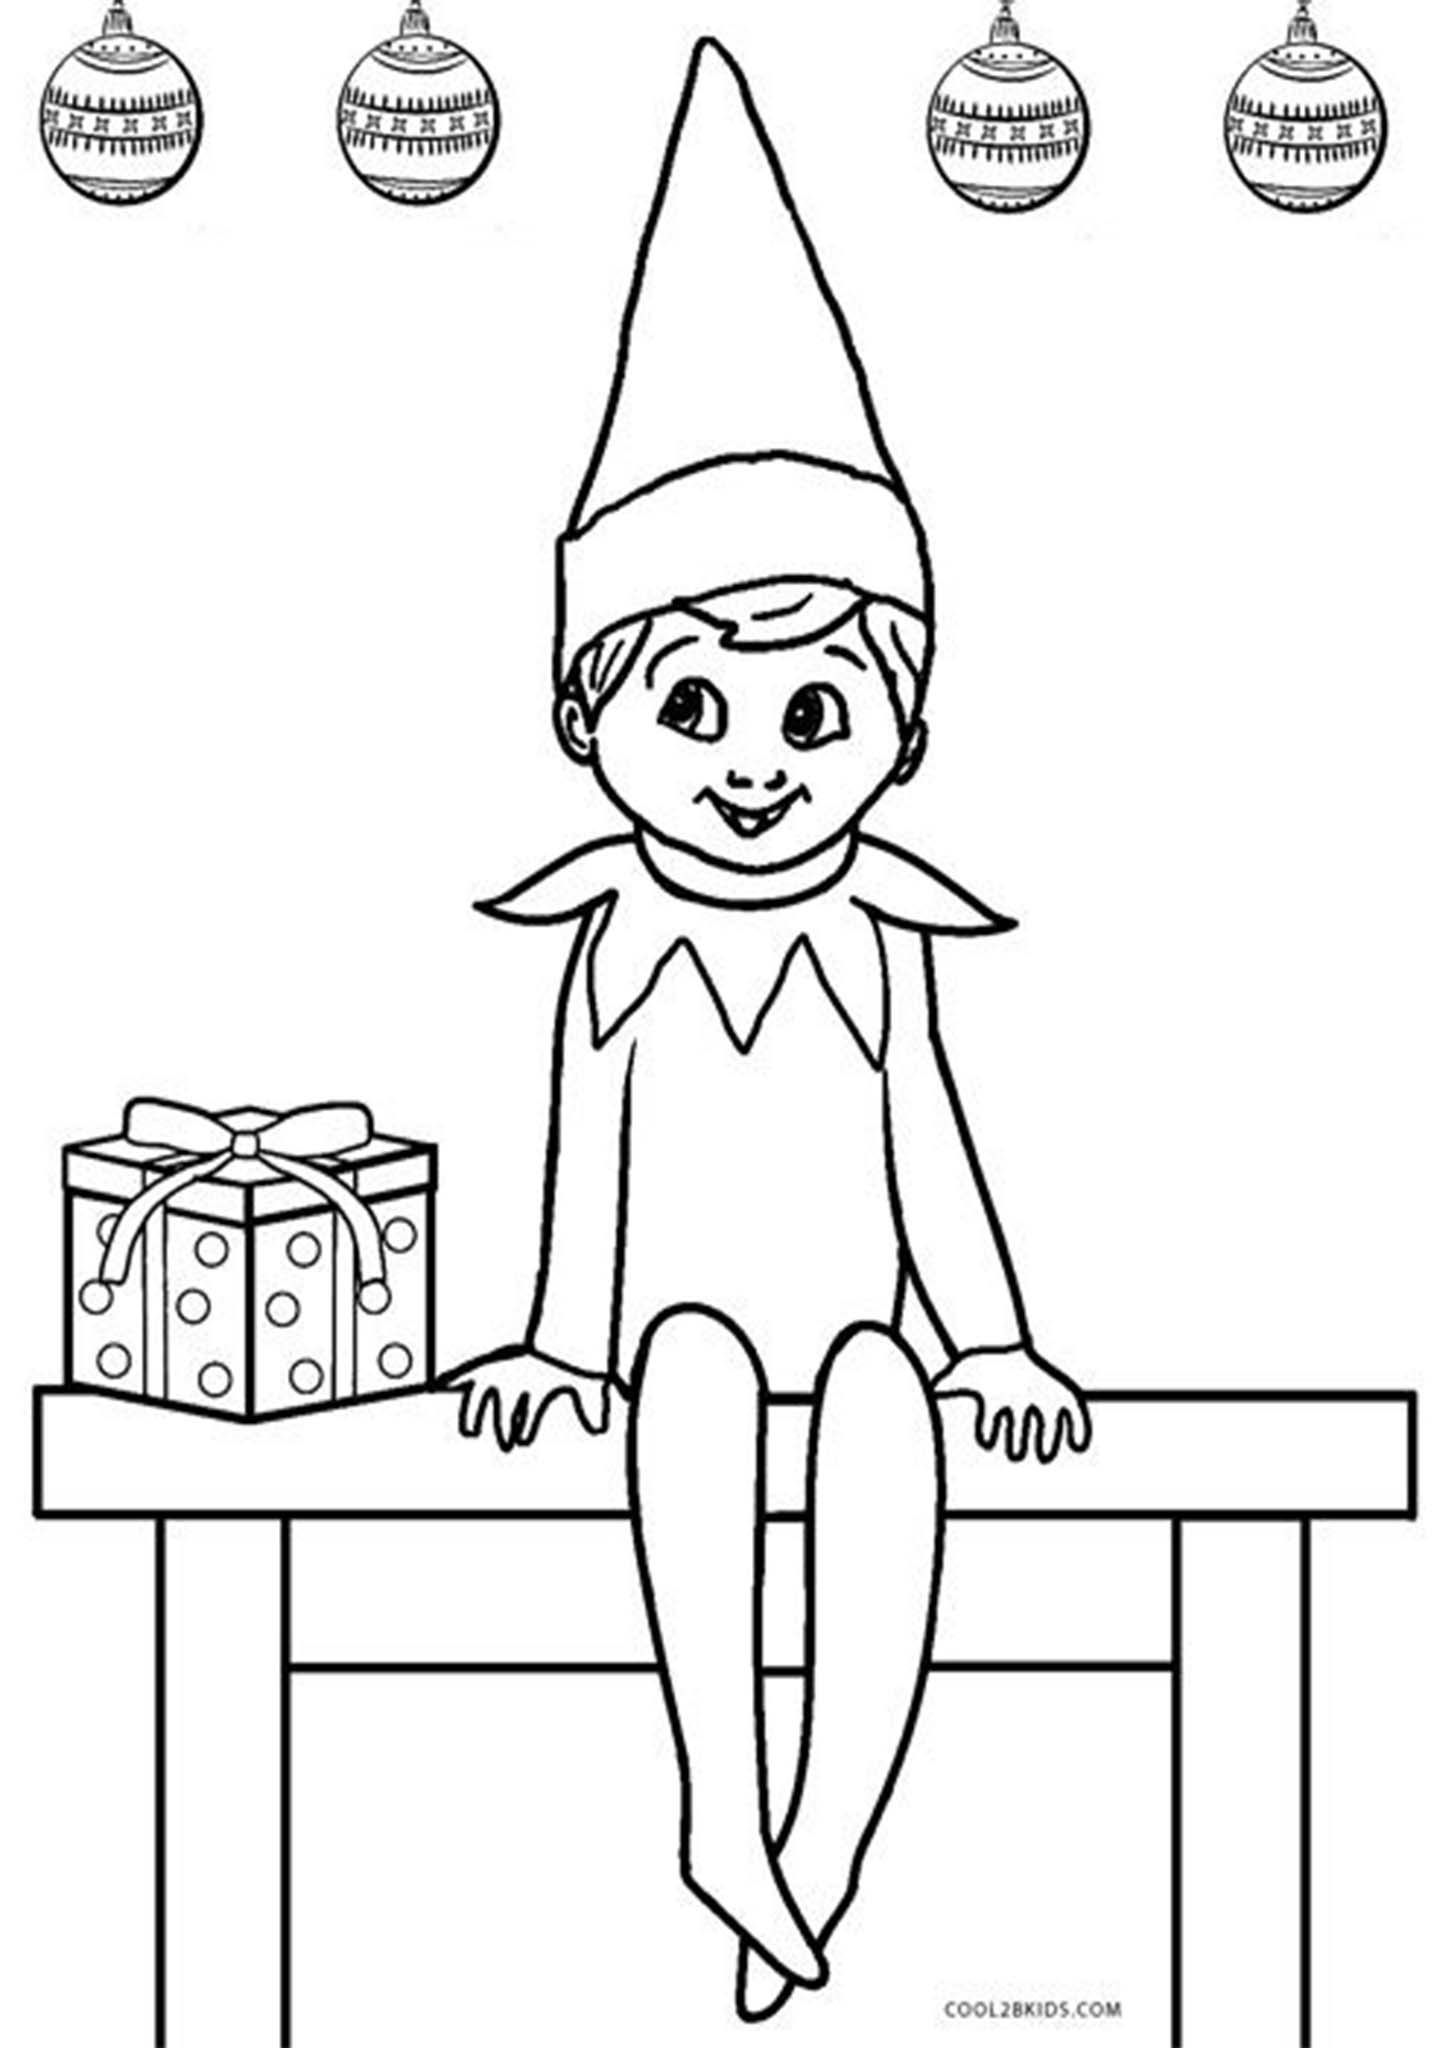 Free printable elf on the shelf coloring pages christmas coloring sheets printable christmas coloring pages christmas coloring pages